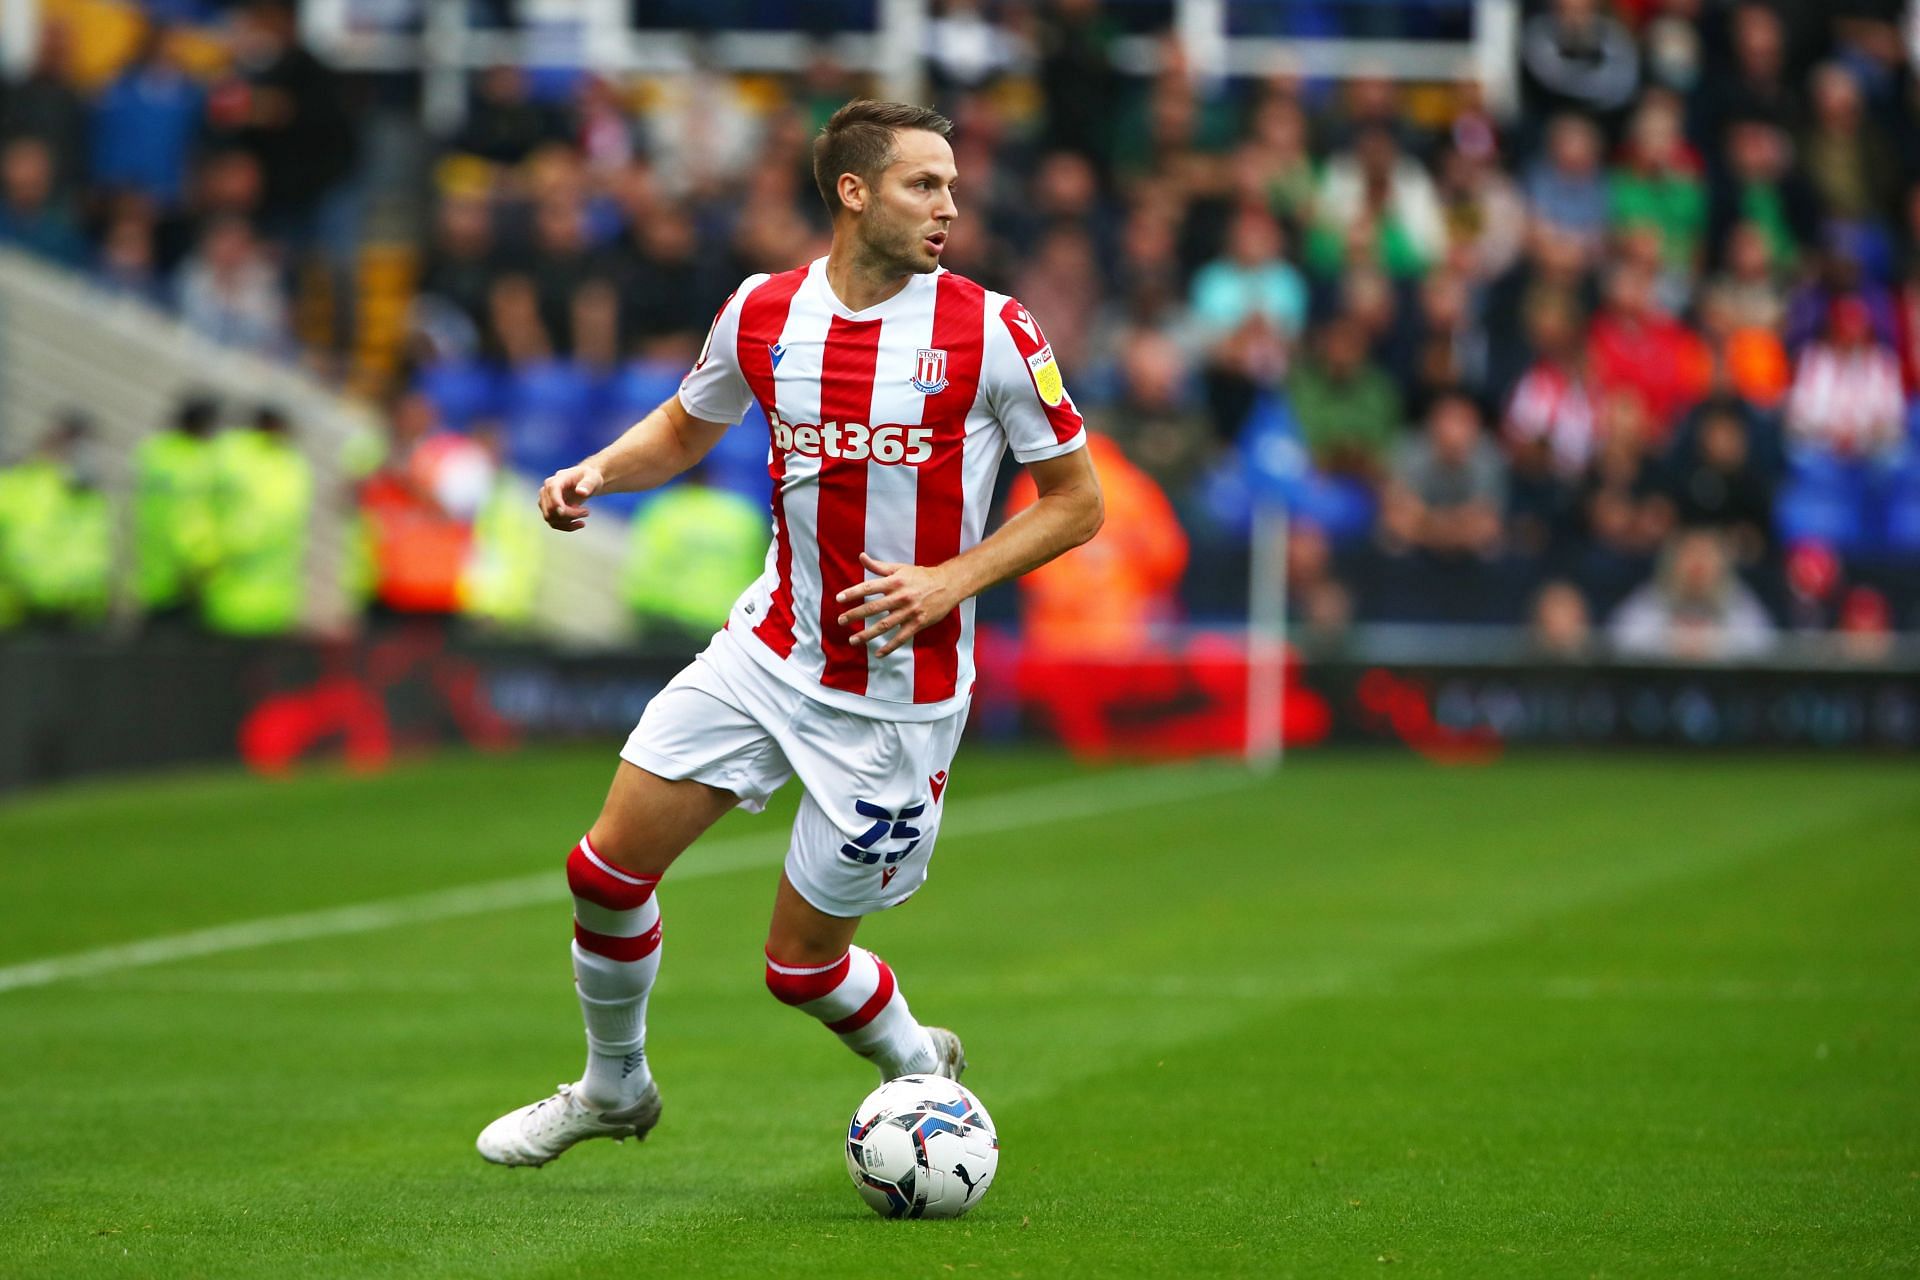 Powell will be a huge miss for Stoke City